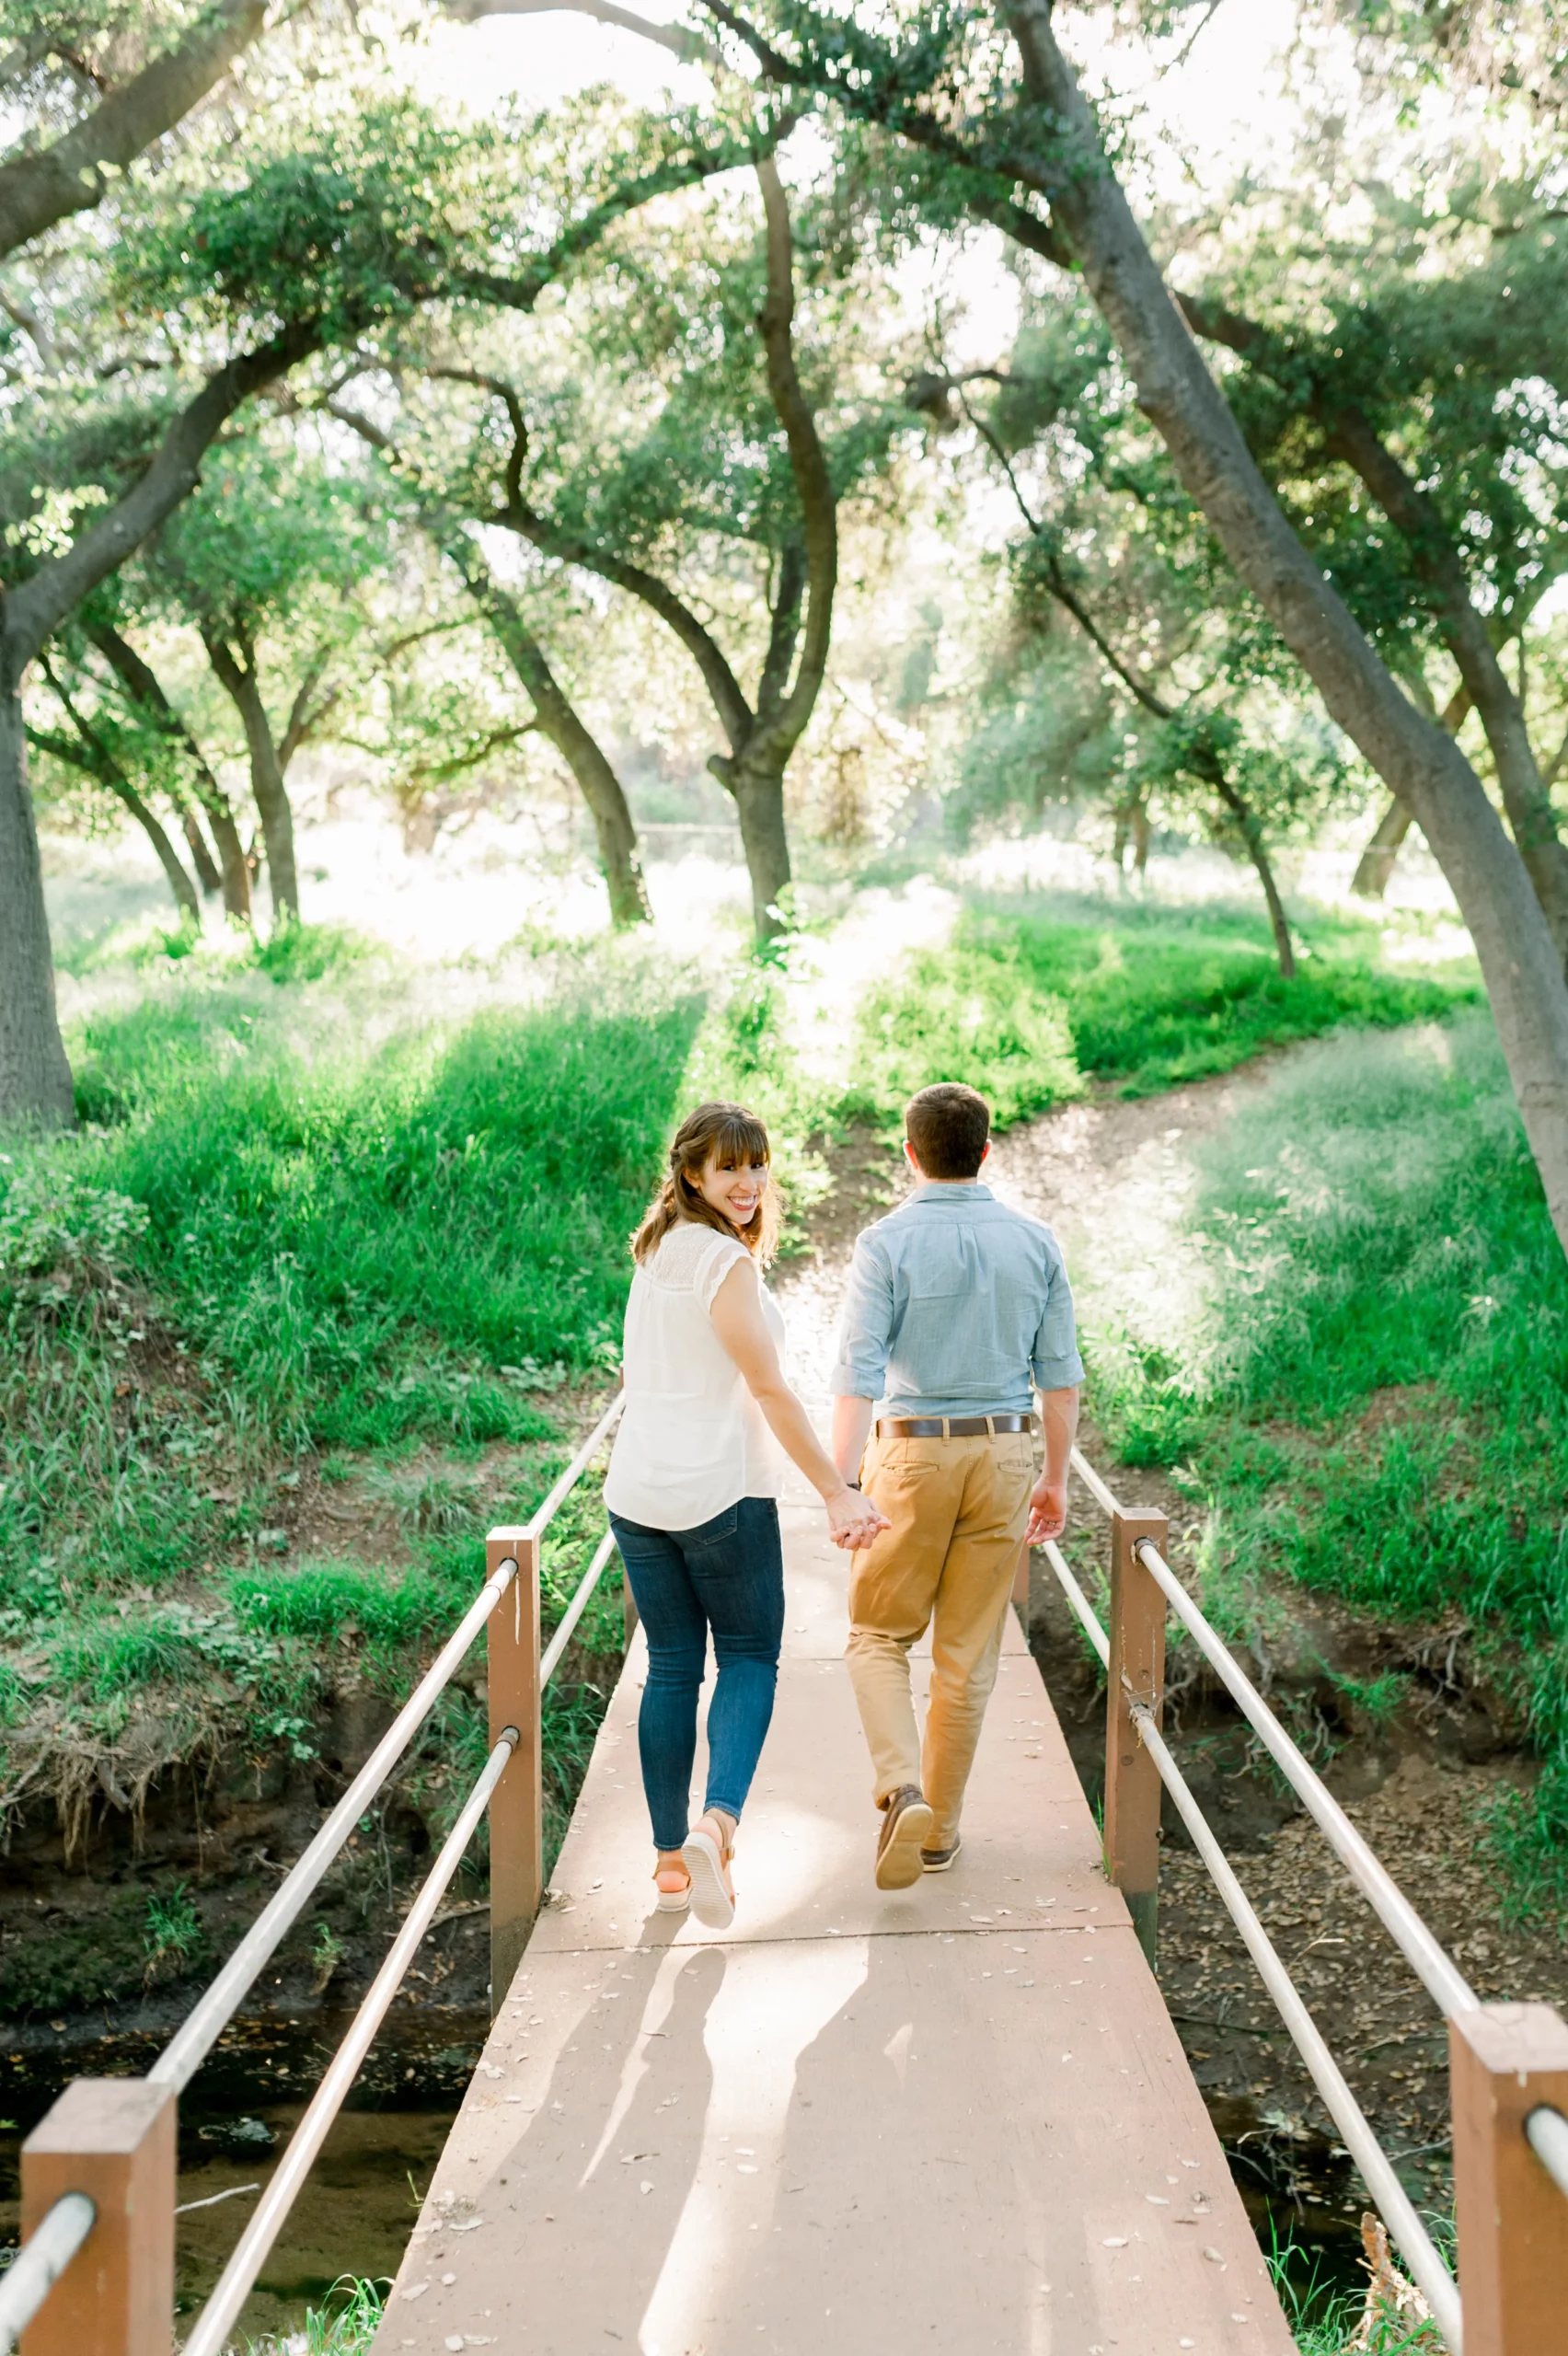 When to Plan Your Beautiful Engagement Session